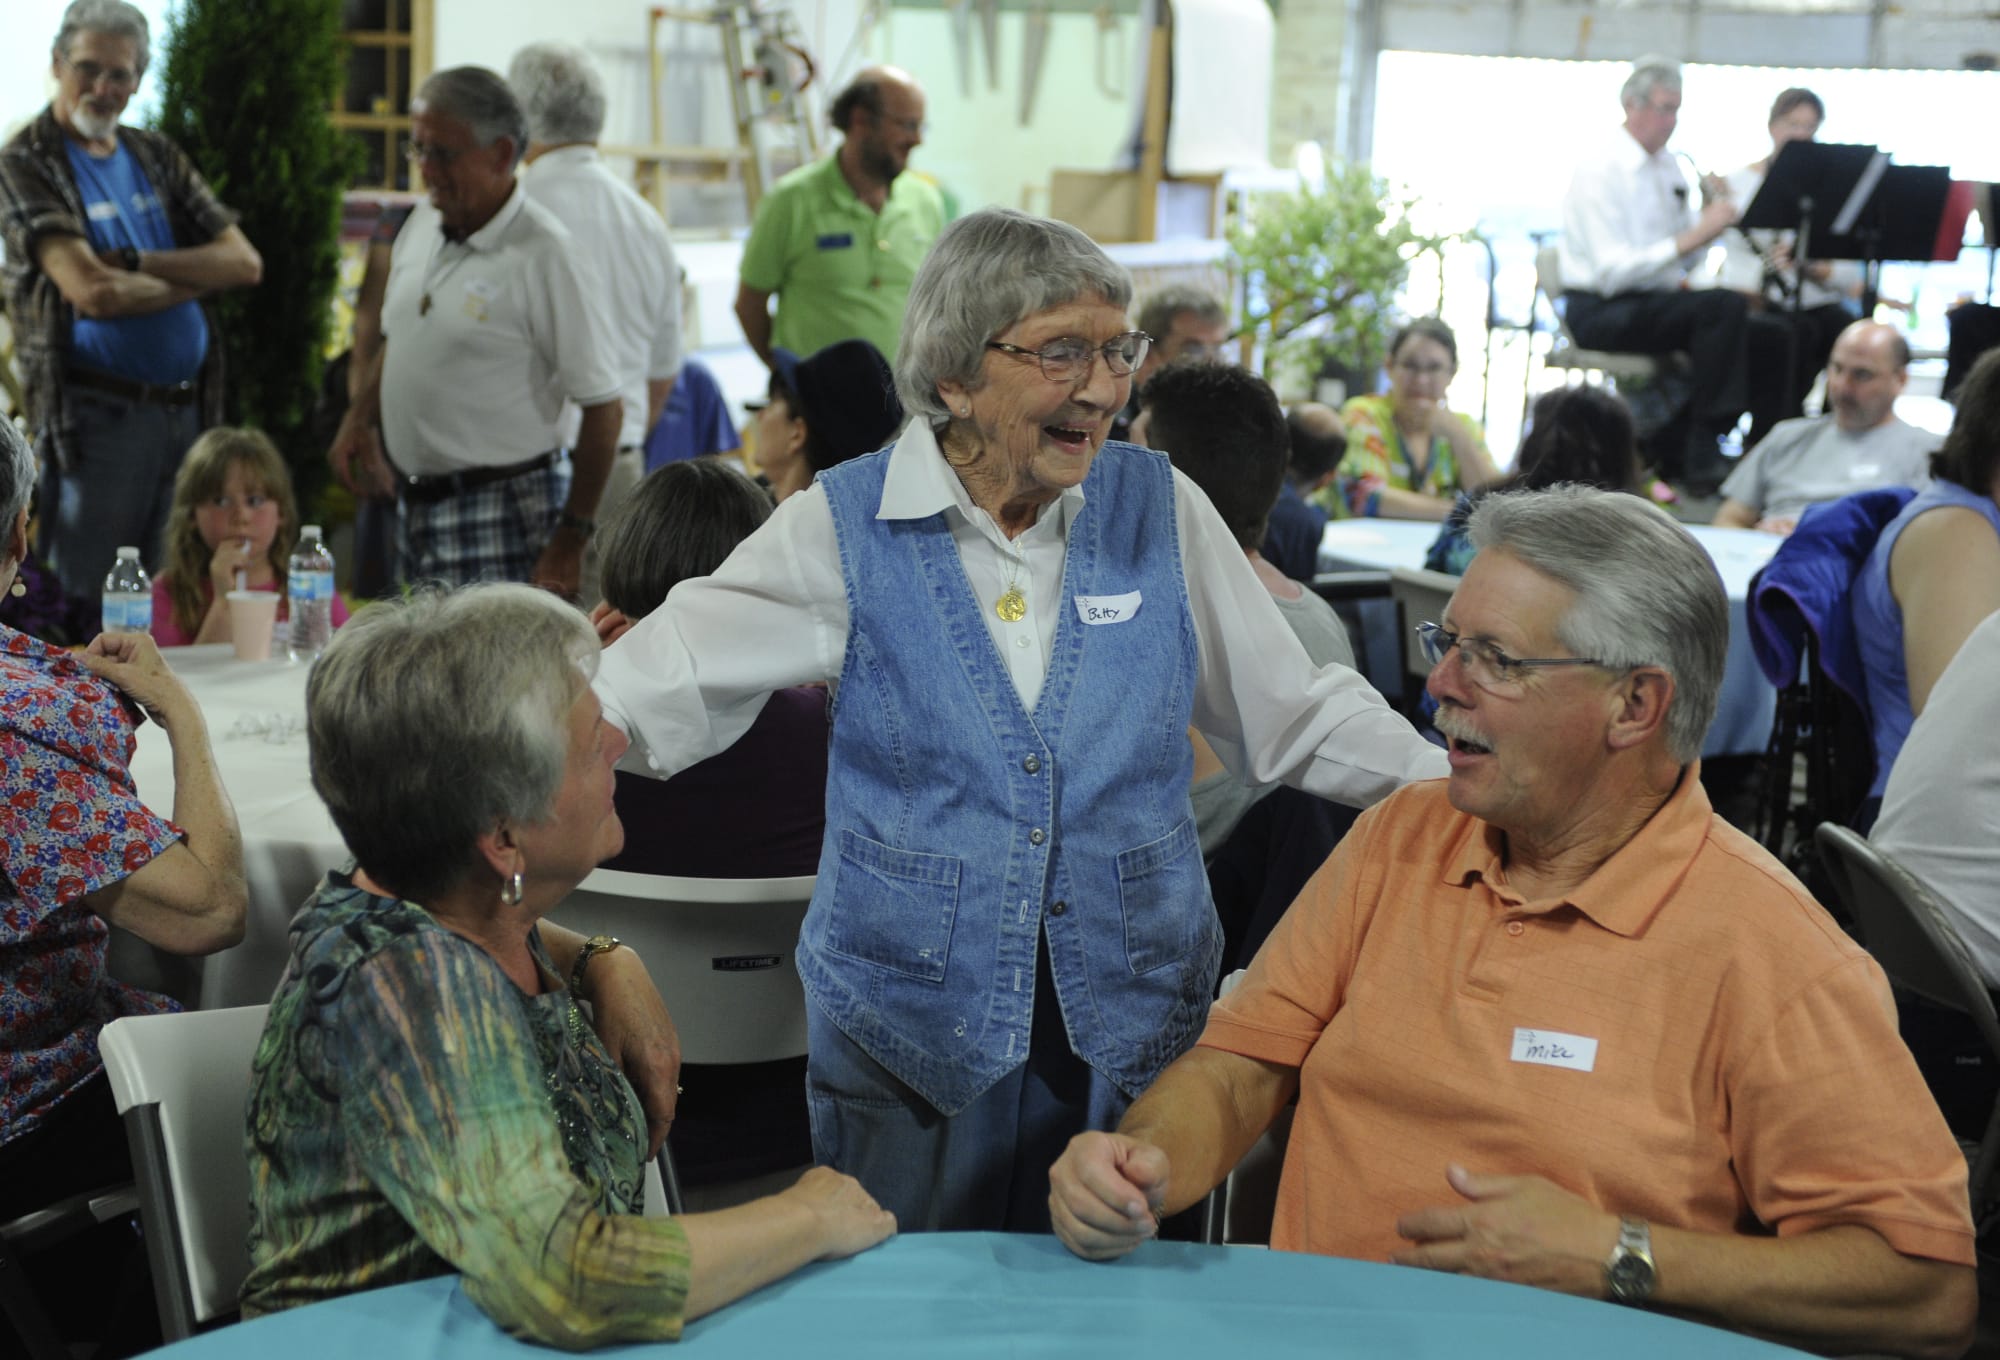 Betty Eves, center, chats with Gayle, left, and Mike Mattson as Friends of the Carpenter celebrates the 10th anniversary of its Friendship Center and thanks its many volunteers.